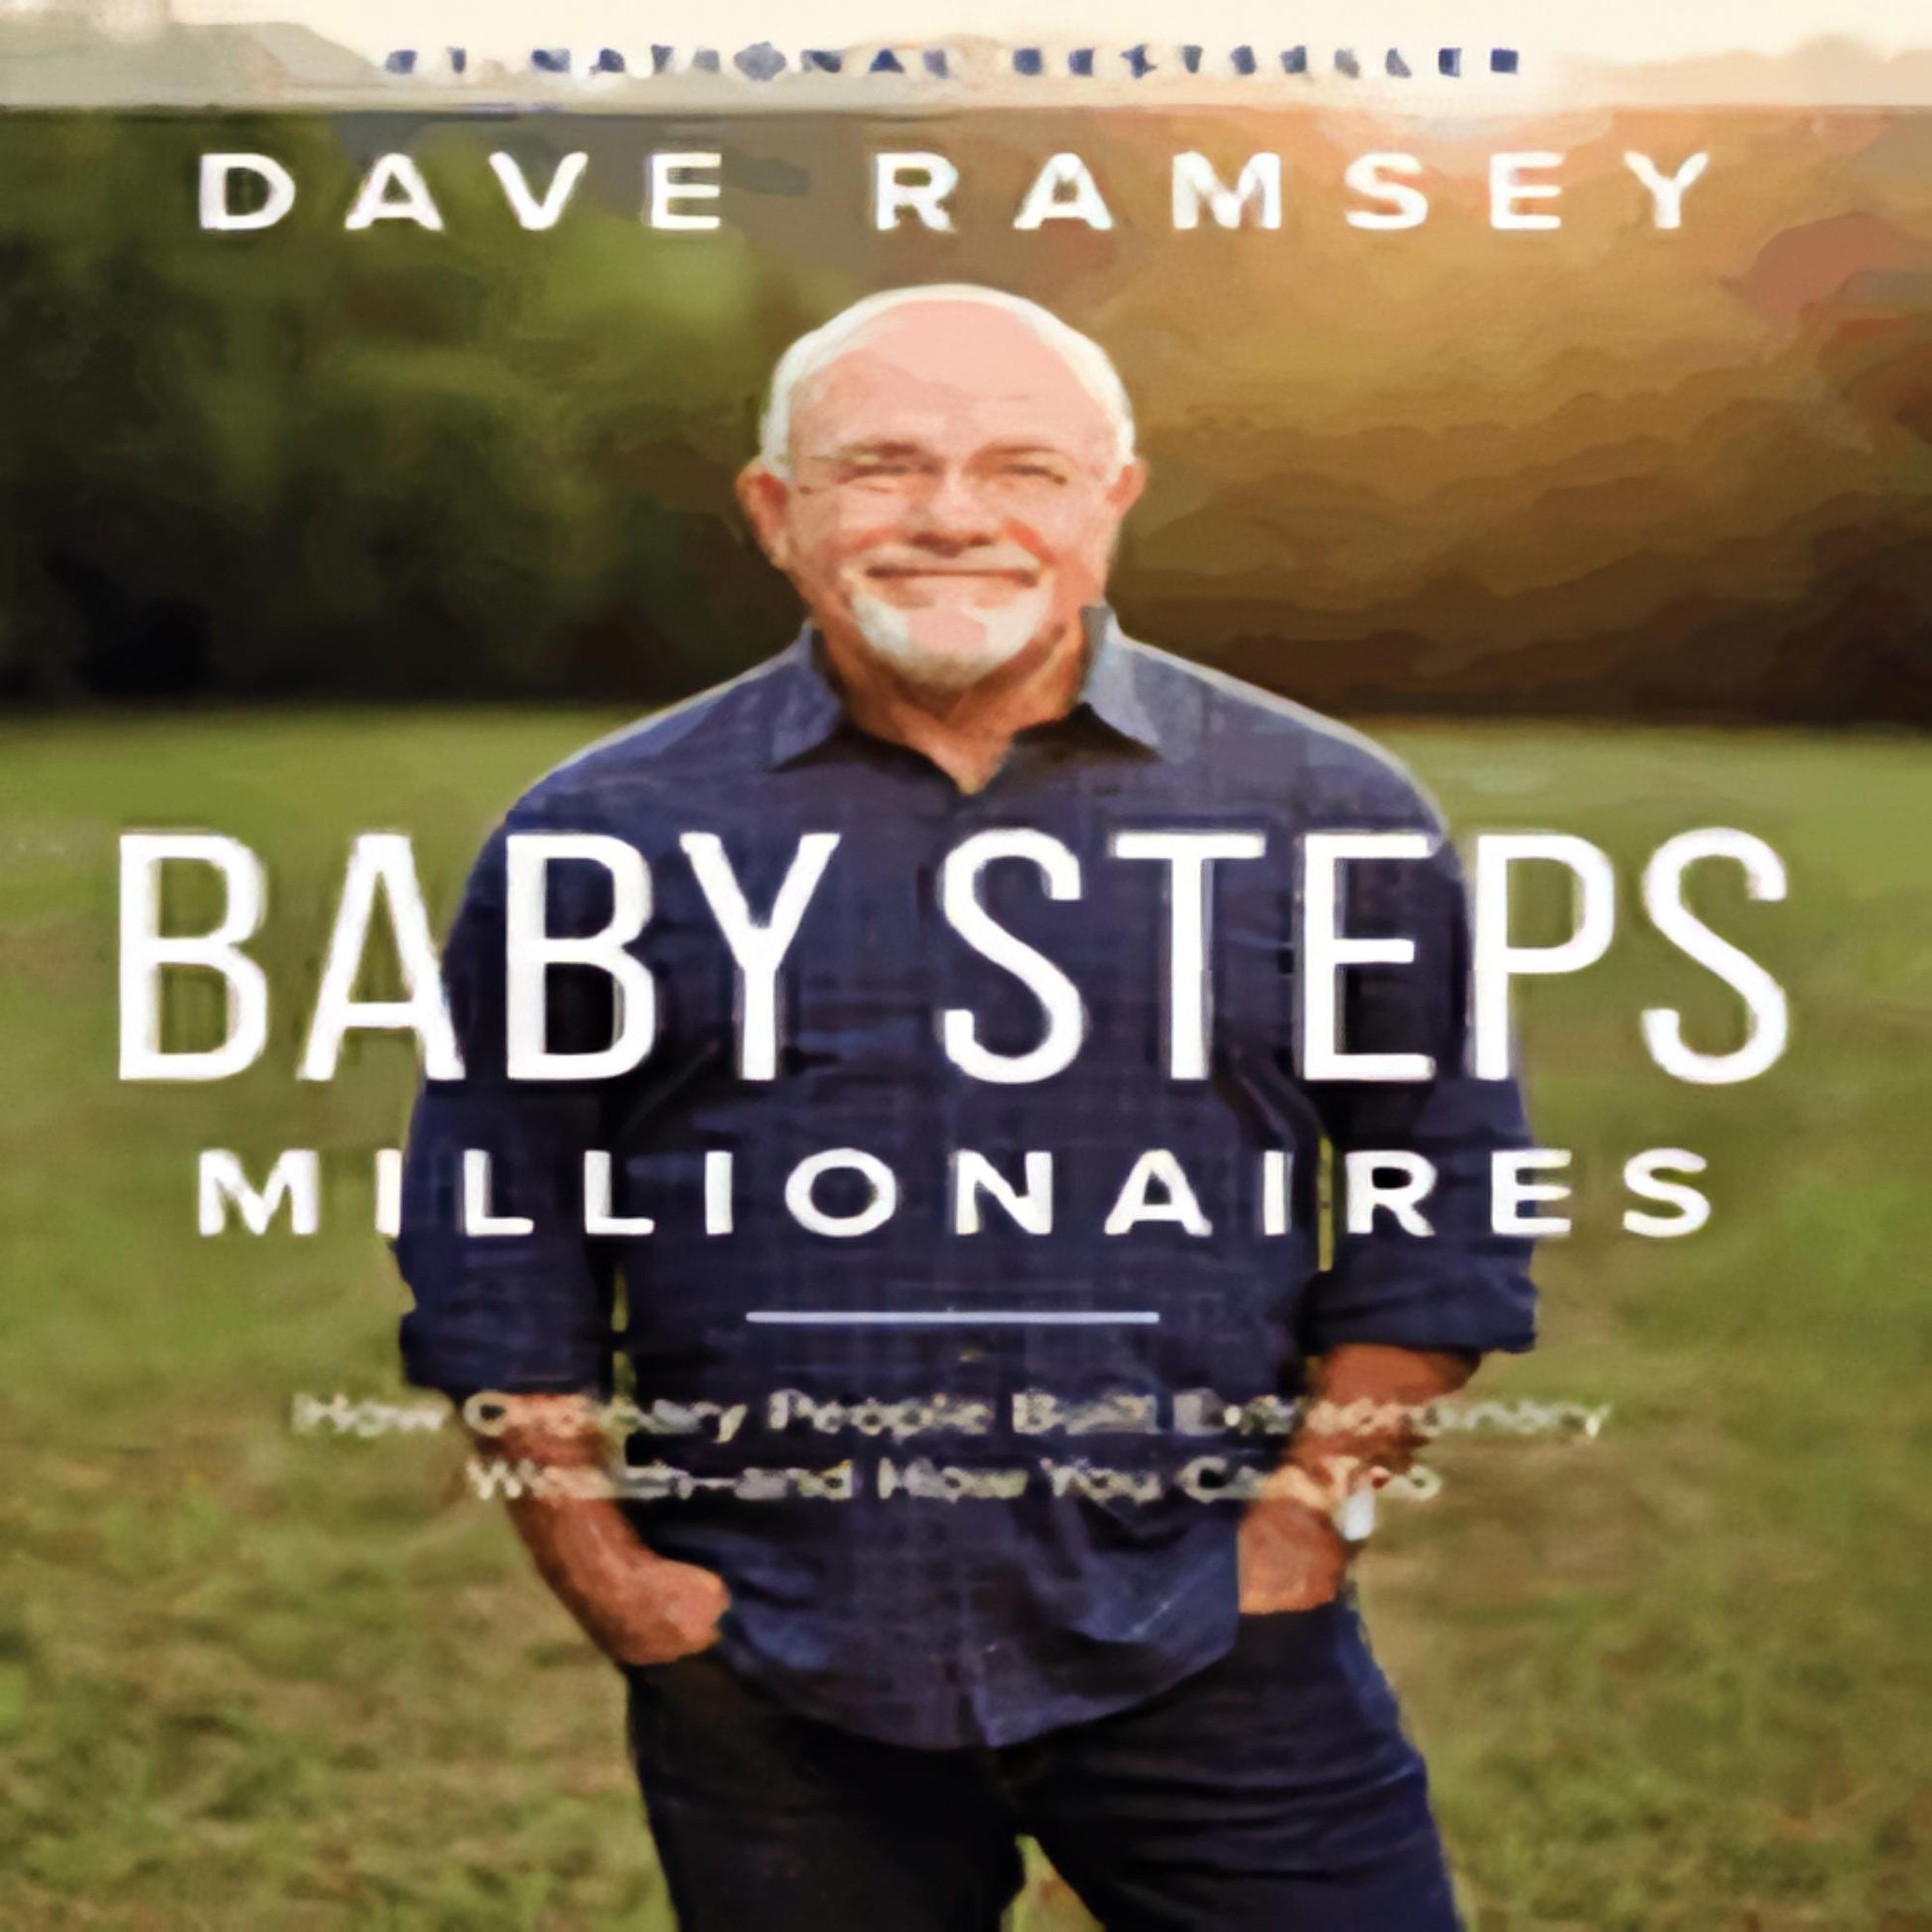 Baby Steps Millionaires: How Ordinary People Built Extraordinary Wealth-And How You Can Too136-022223-1942121598DPGBOOKSTORE.COM. Today's Bestsellers.